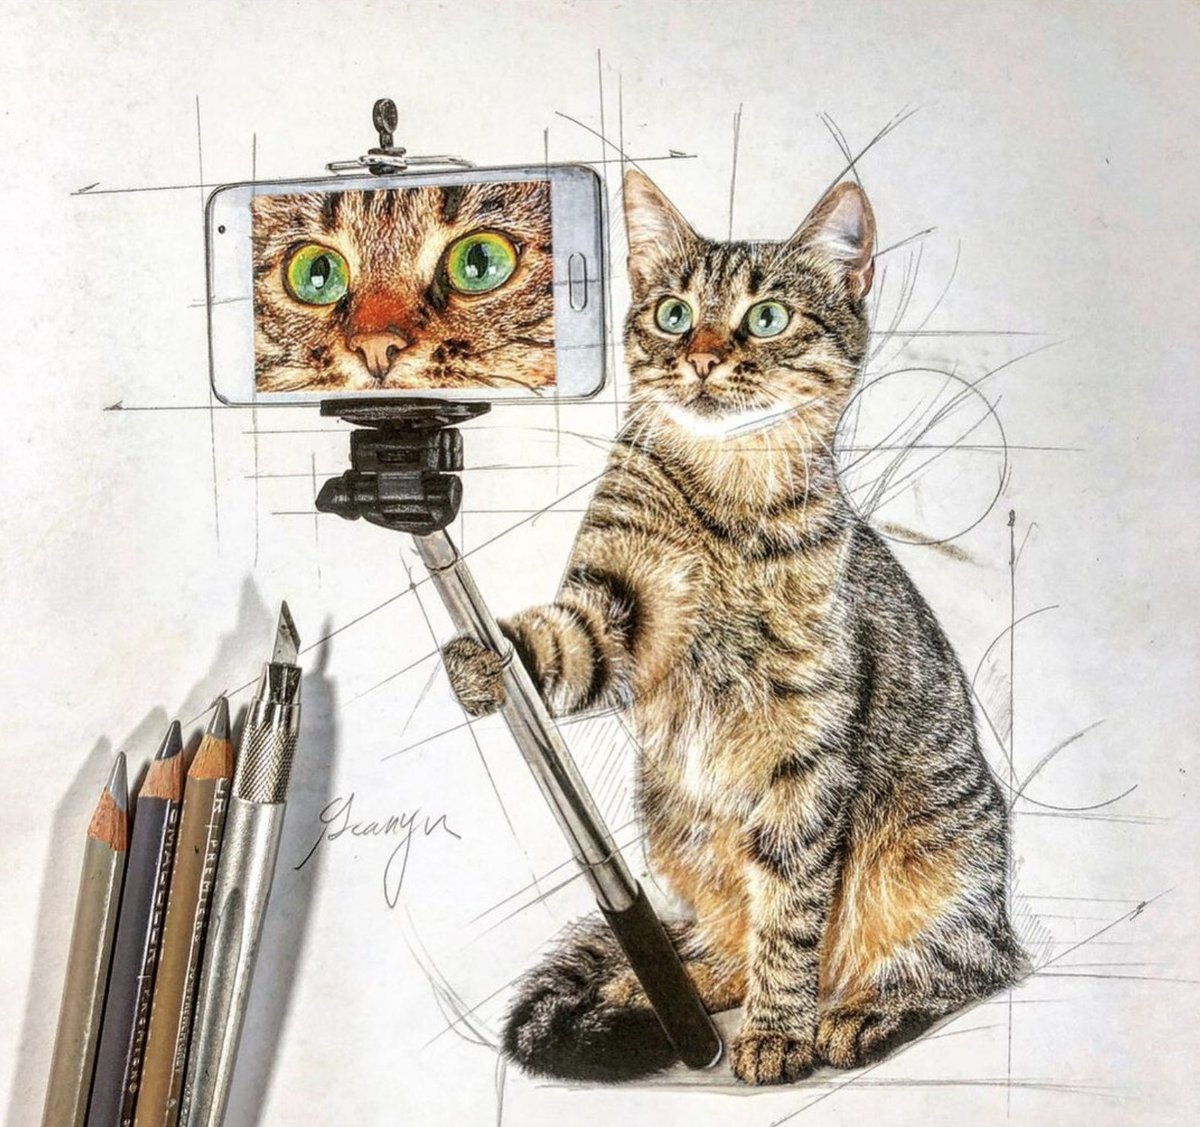 Guan Drawing A Cat Selfie Drawing 色鉛筆イラスト Sketch Pencil 그림 絵 Copic 手繪 Colorpencil イラスト 色鉛筆 色鉛筆画 猫